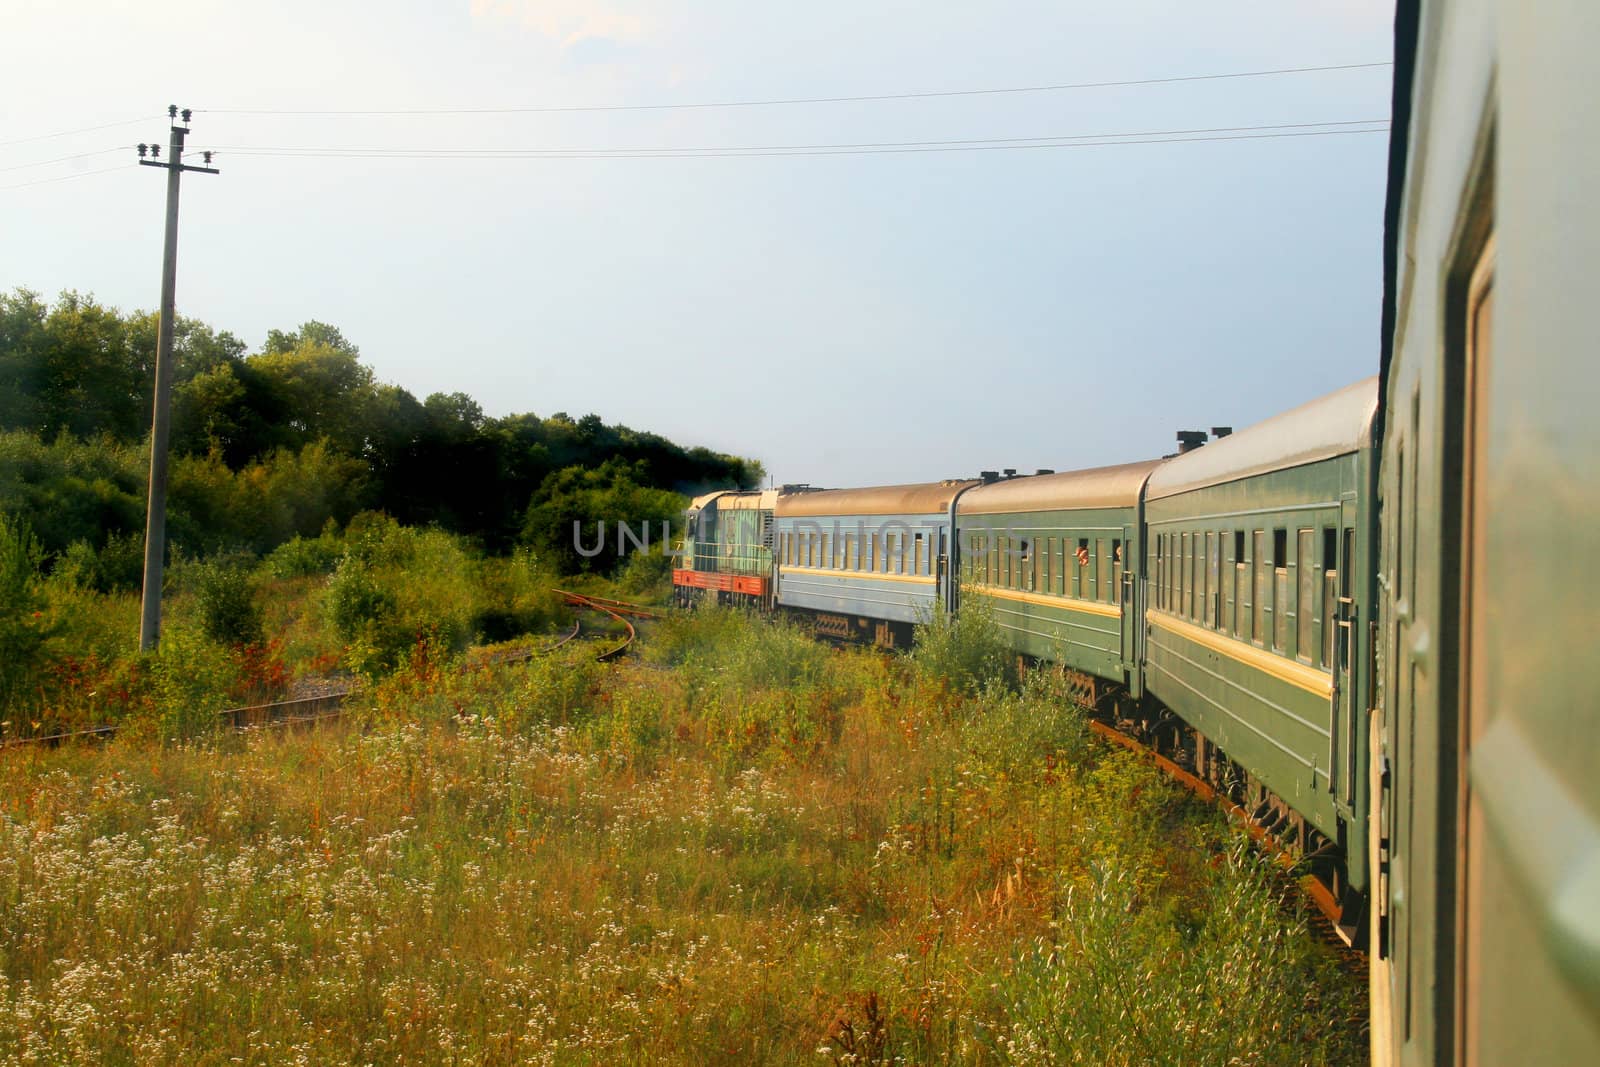 Eastern european train entering into a forested area of track